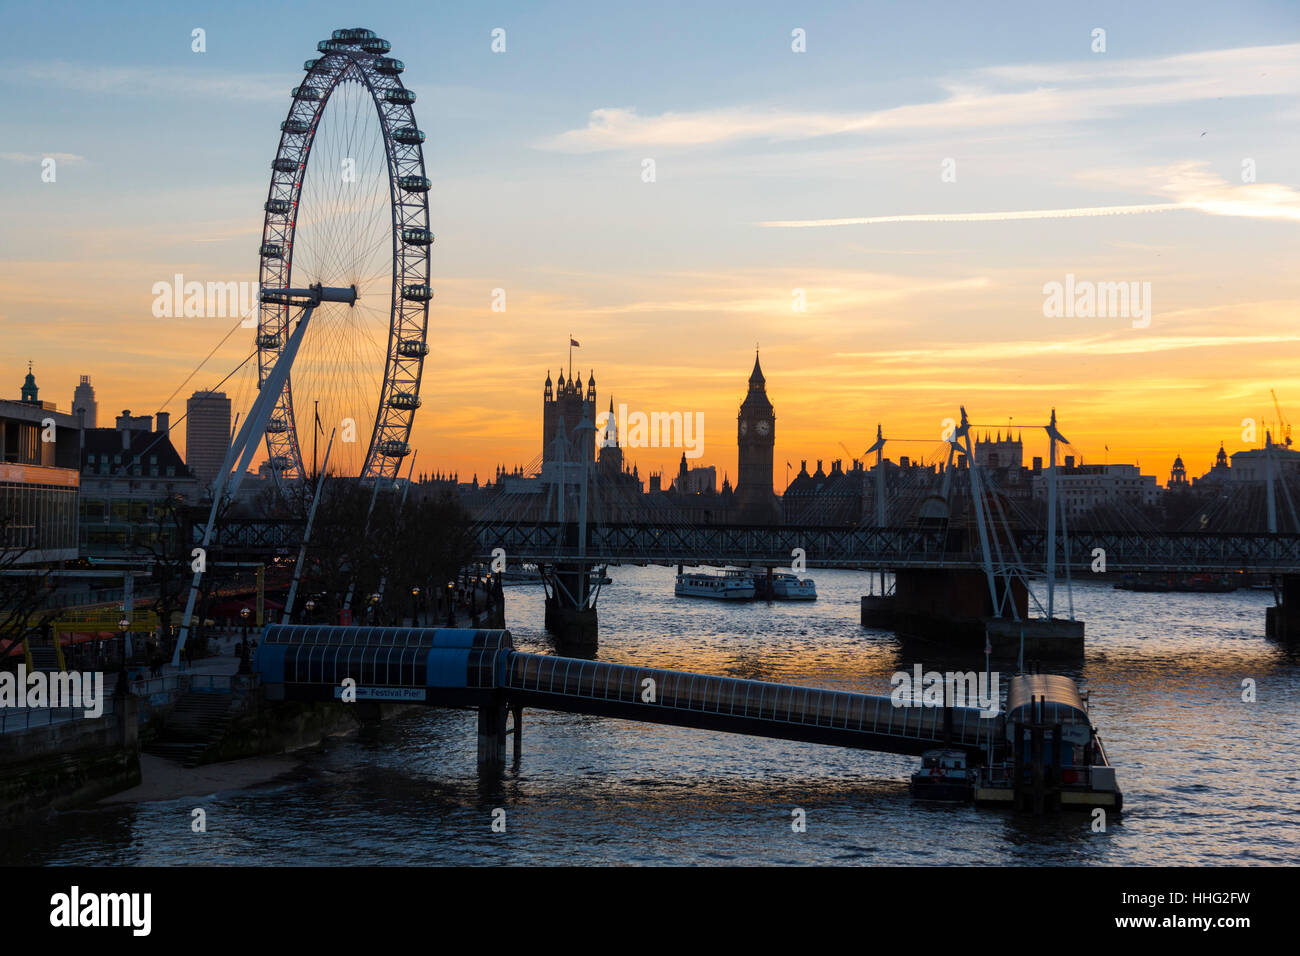 London, UK. 19 January 2017. Weather. London skyline with the London Eye and the Houses of Parliament at sunset. © Nick Savage/Alamy Live News Stock Photo